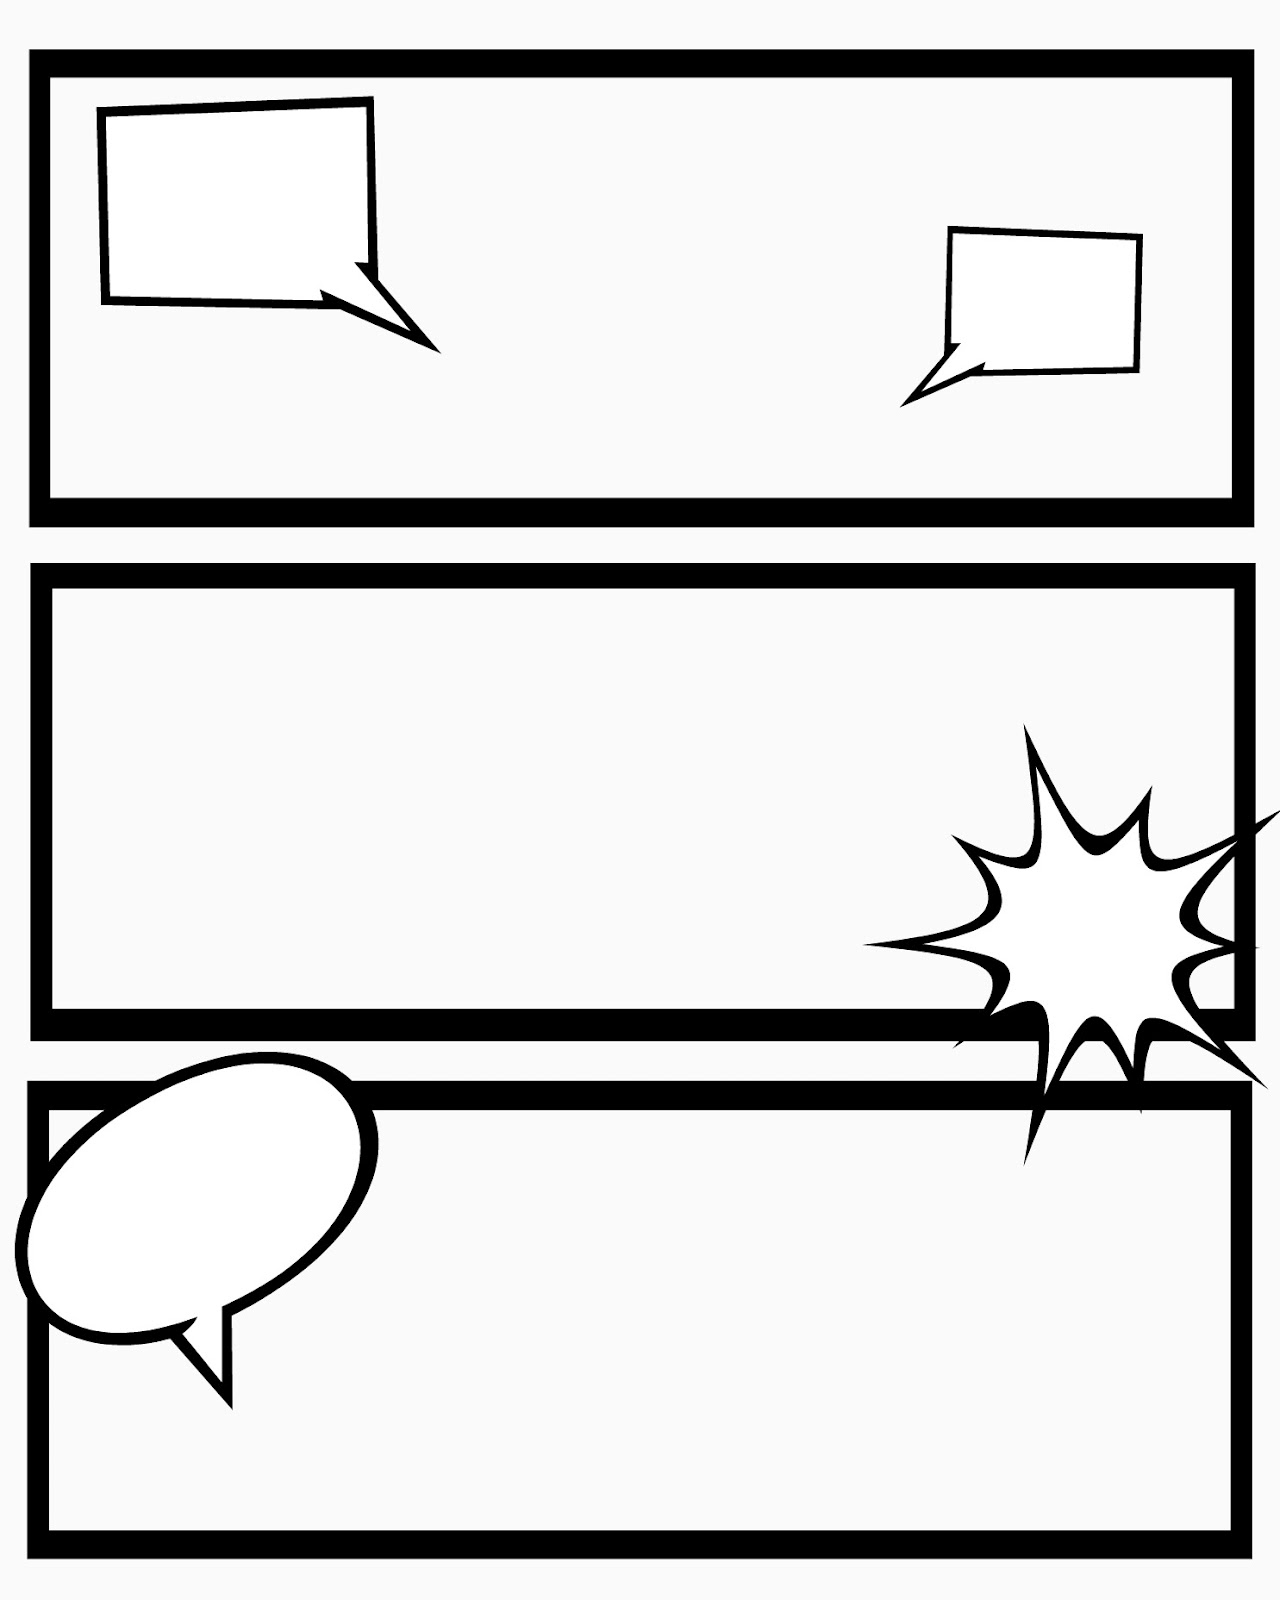 6-best-images-of-comic-strip-template-for-kids-printable-comic-strip